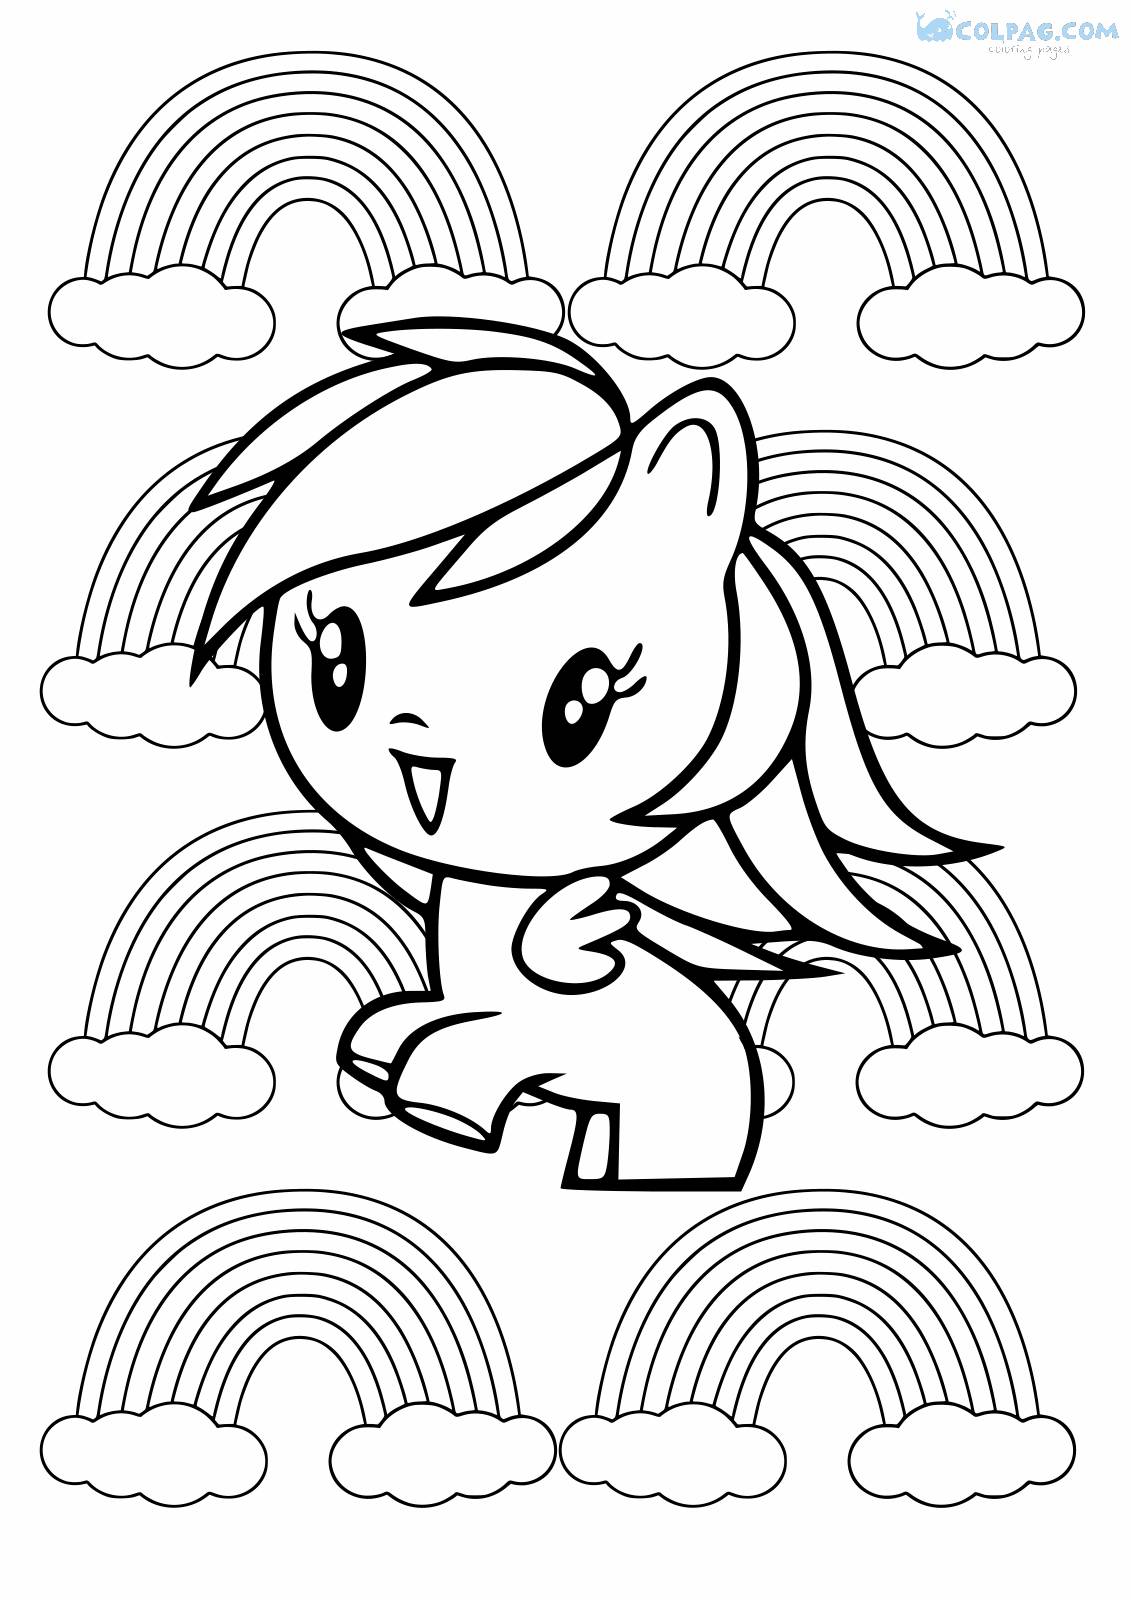 Rainbow Dash Coloring Pages to Print Online